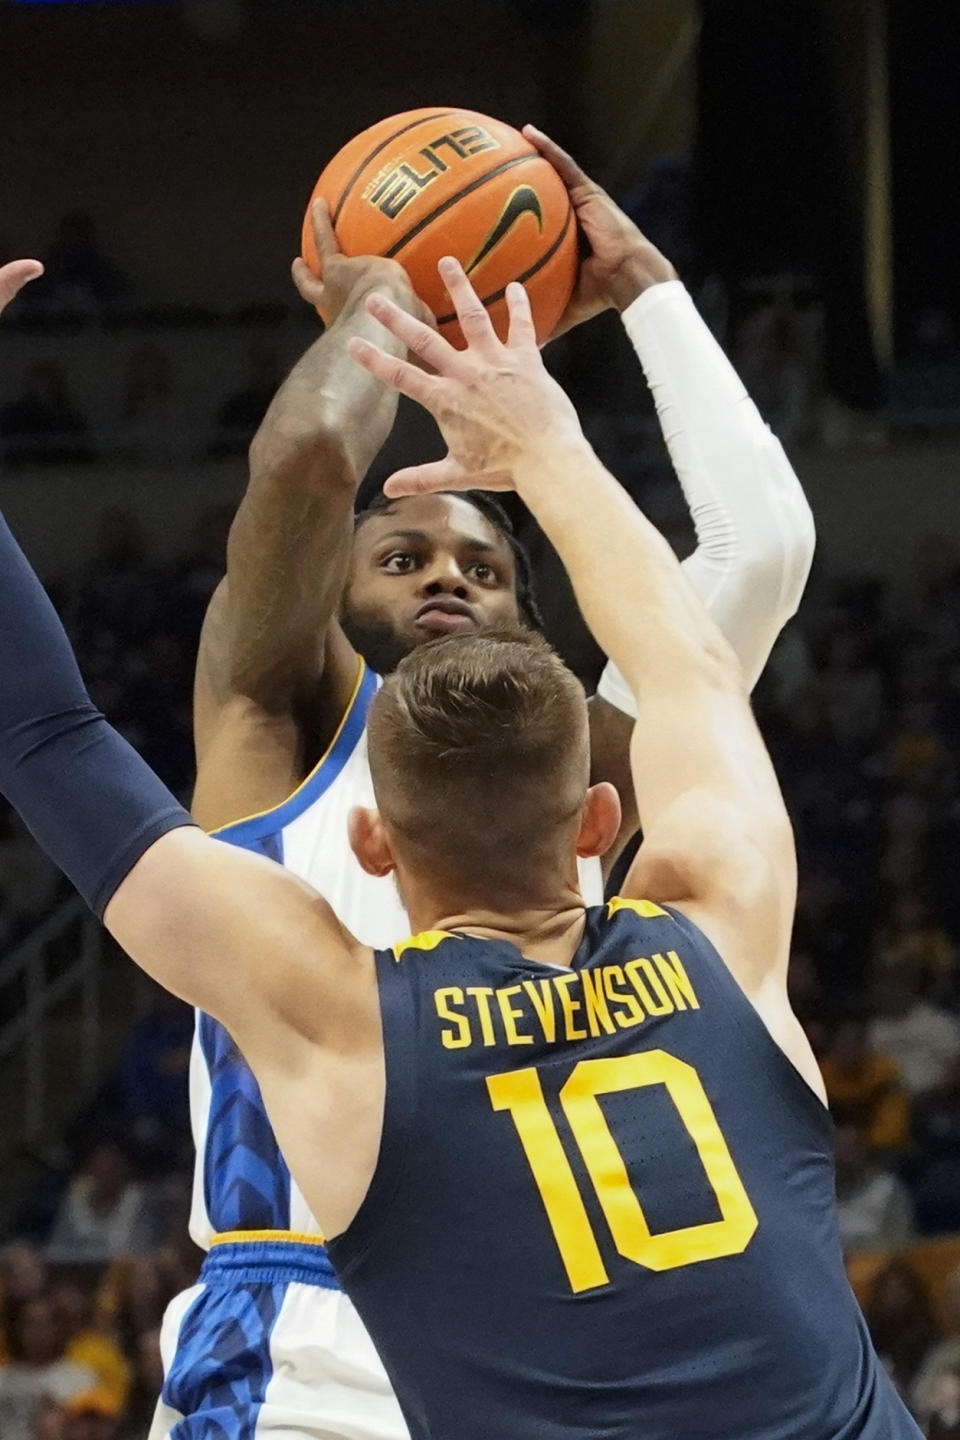 Pittsburgh's Jamarius Burton, top, shoots over West Virginia's Erik Stevenson (10) during the first half of an NCAA college basketball game, Friday, Nov. 11, 2022, in Pittsburgh. (AP Photo/Keith Srakocic)